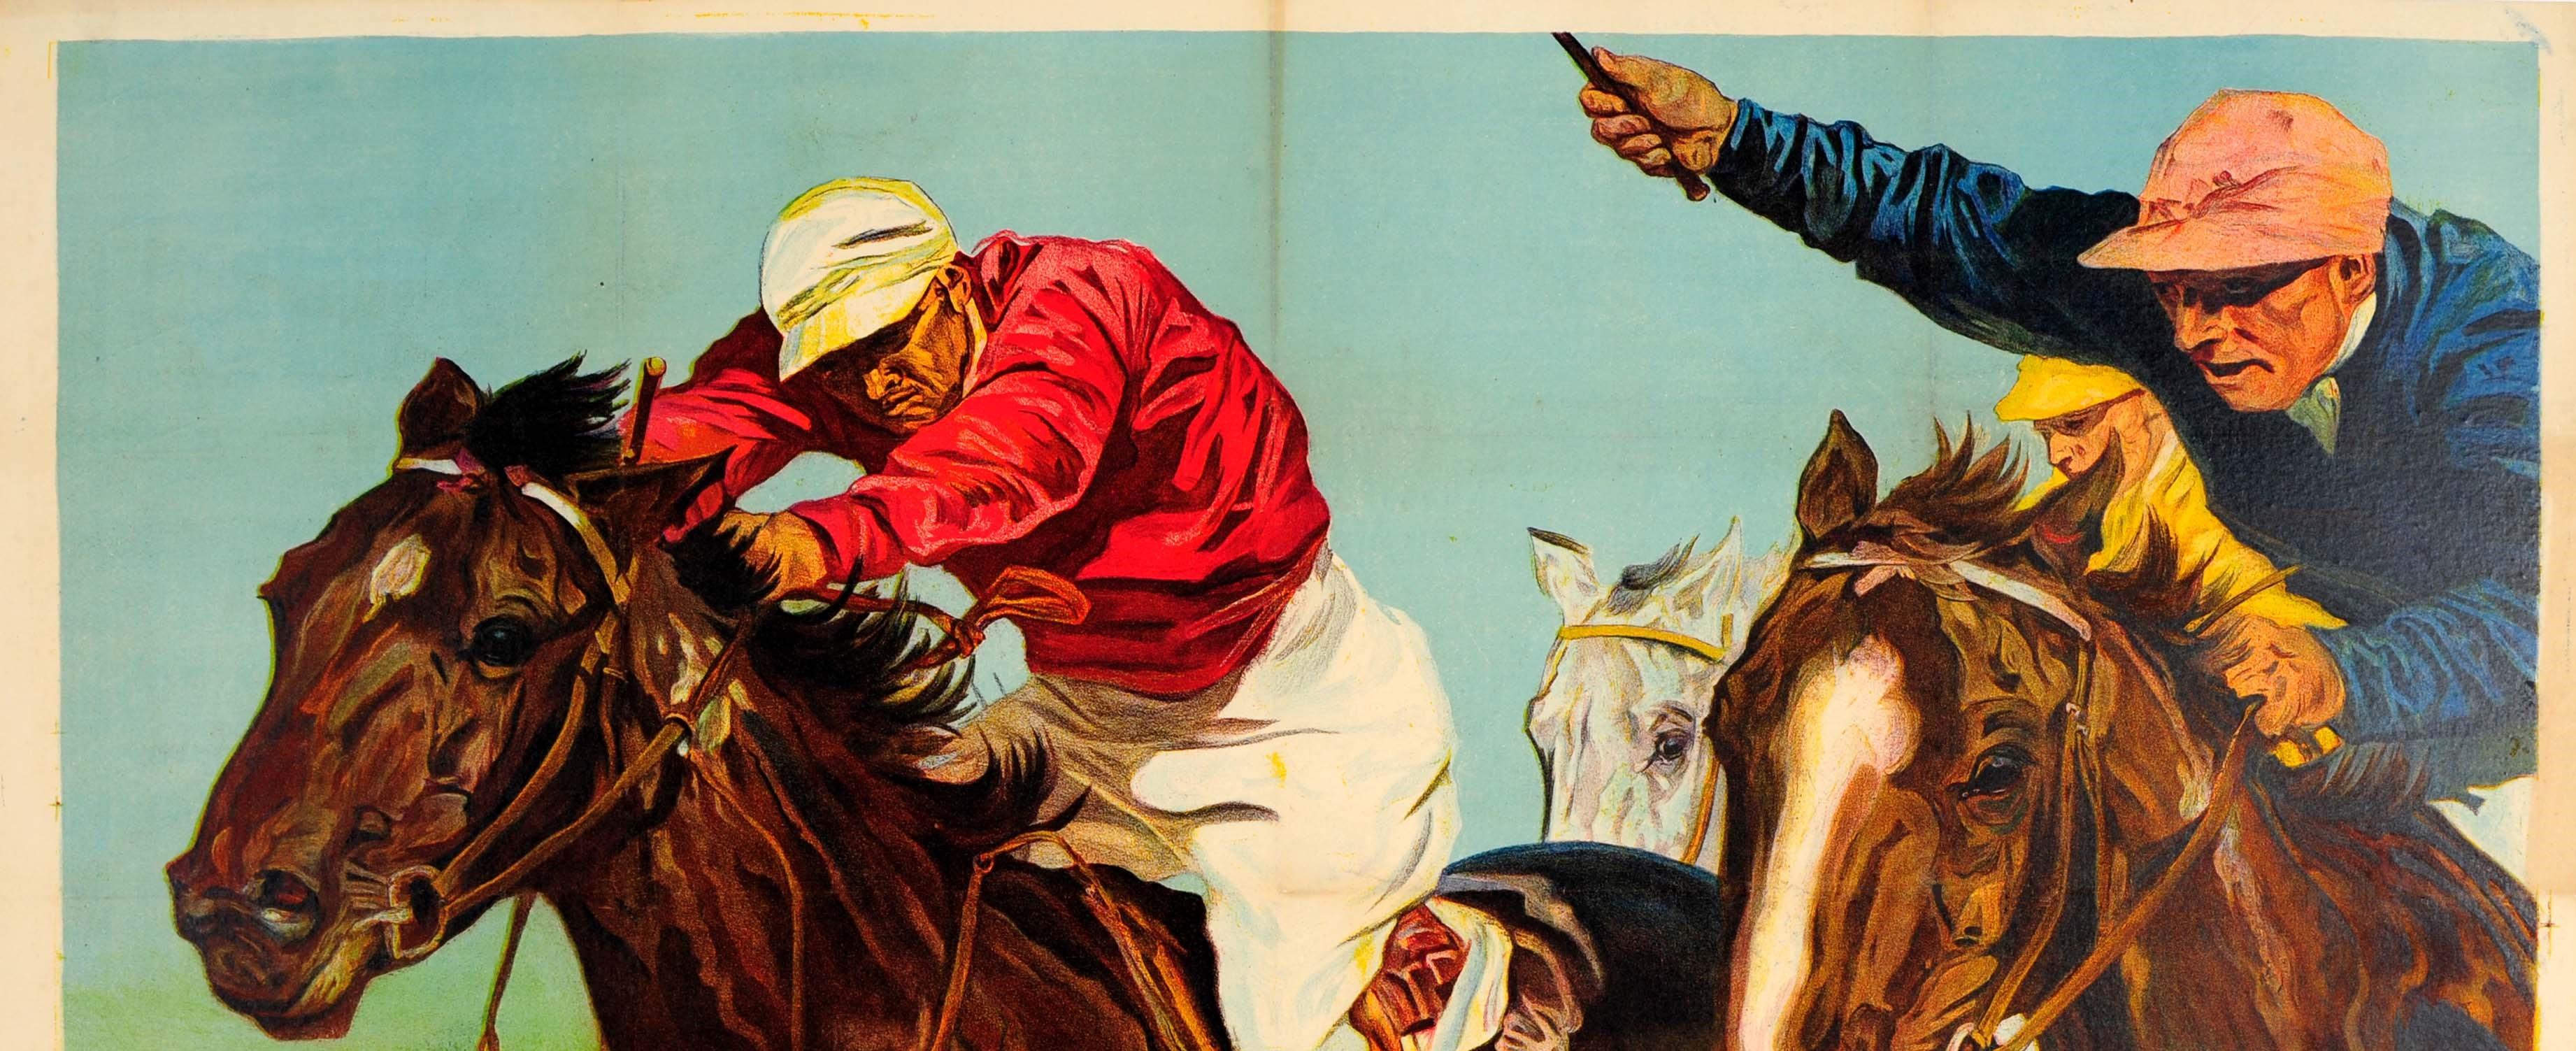 Original vintage horse racing poster depicting a dynamic image of two jockeys riding neck and neck towards the finish line with another rider in the background, featuring great detail in the painting of the horses and the faces and clothes of the